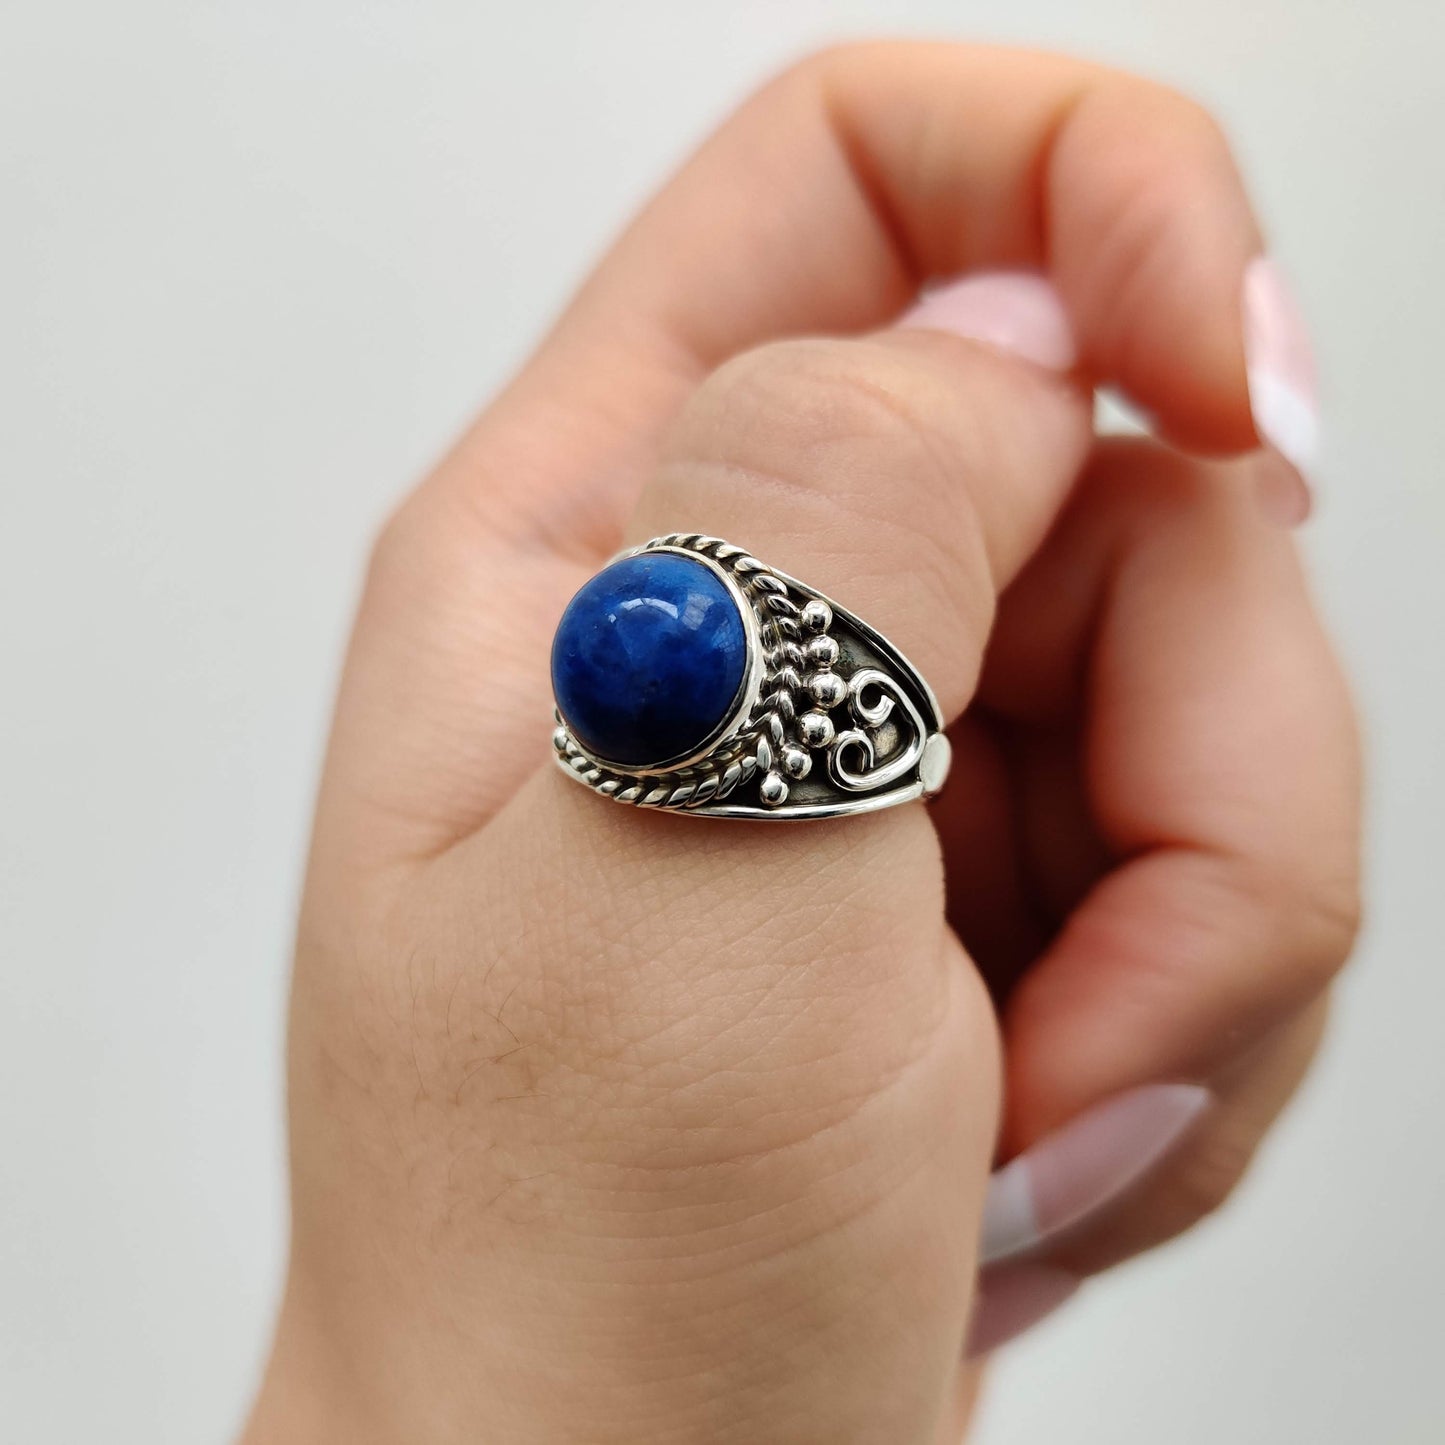 Lapis Lazuli Round Signet 925 Sterling Silver Ring - Rivendell Shop